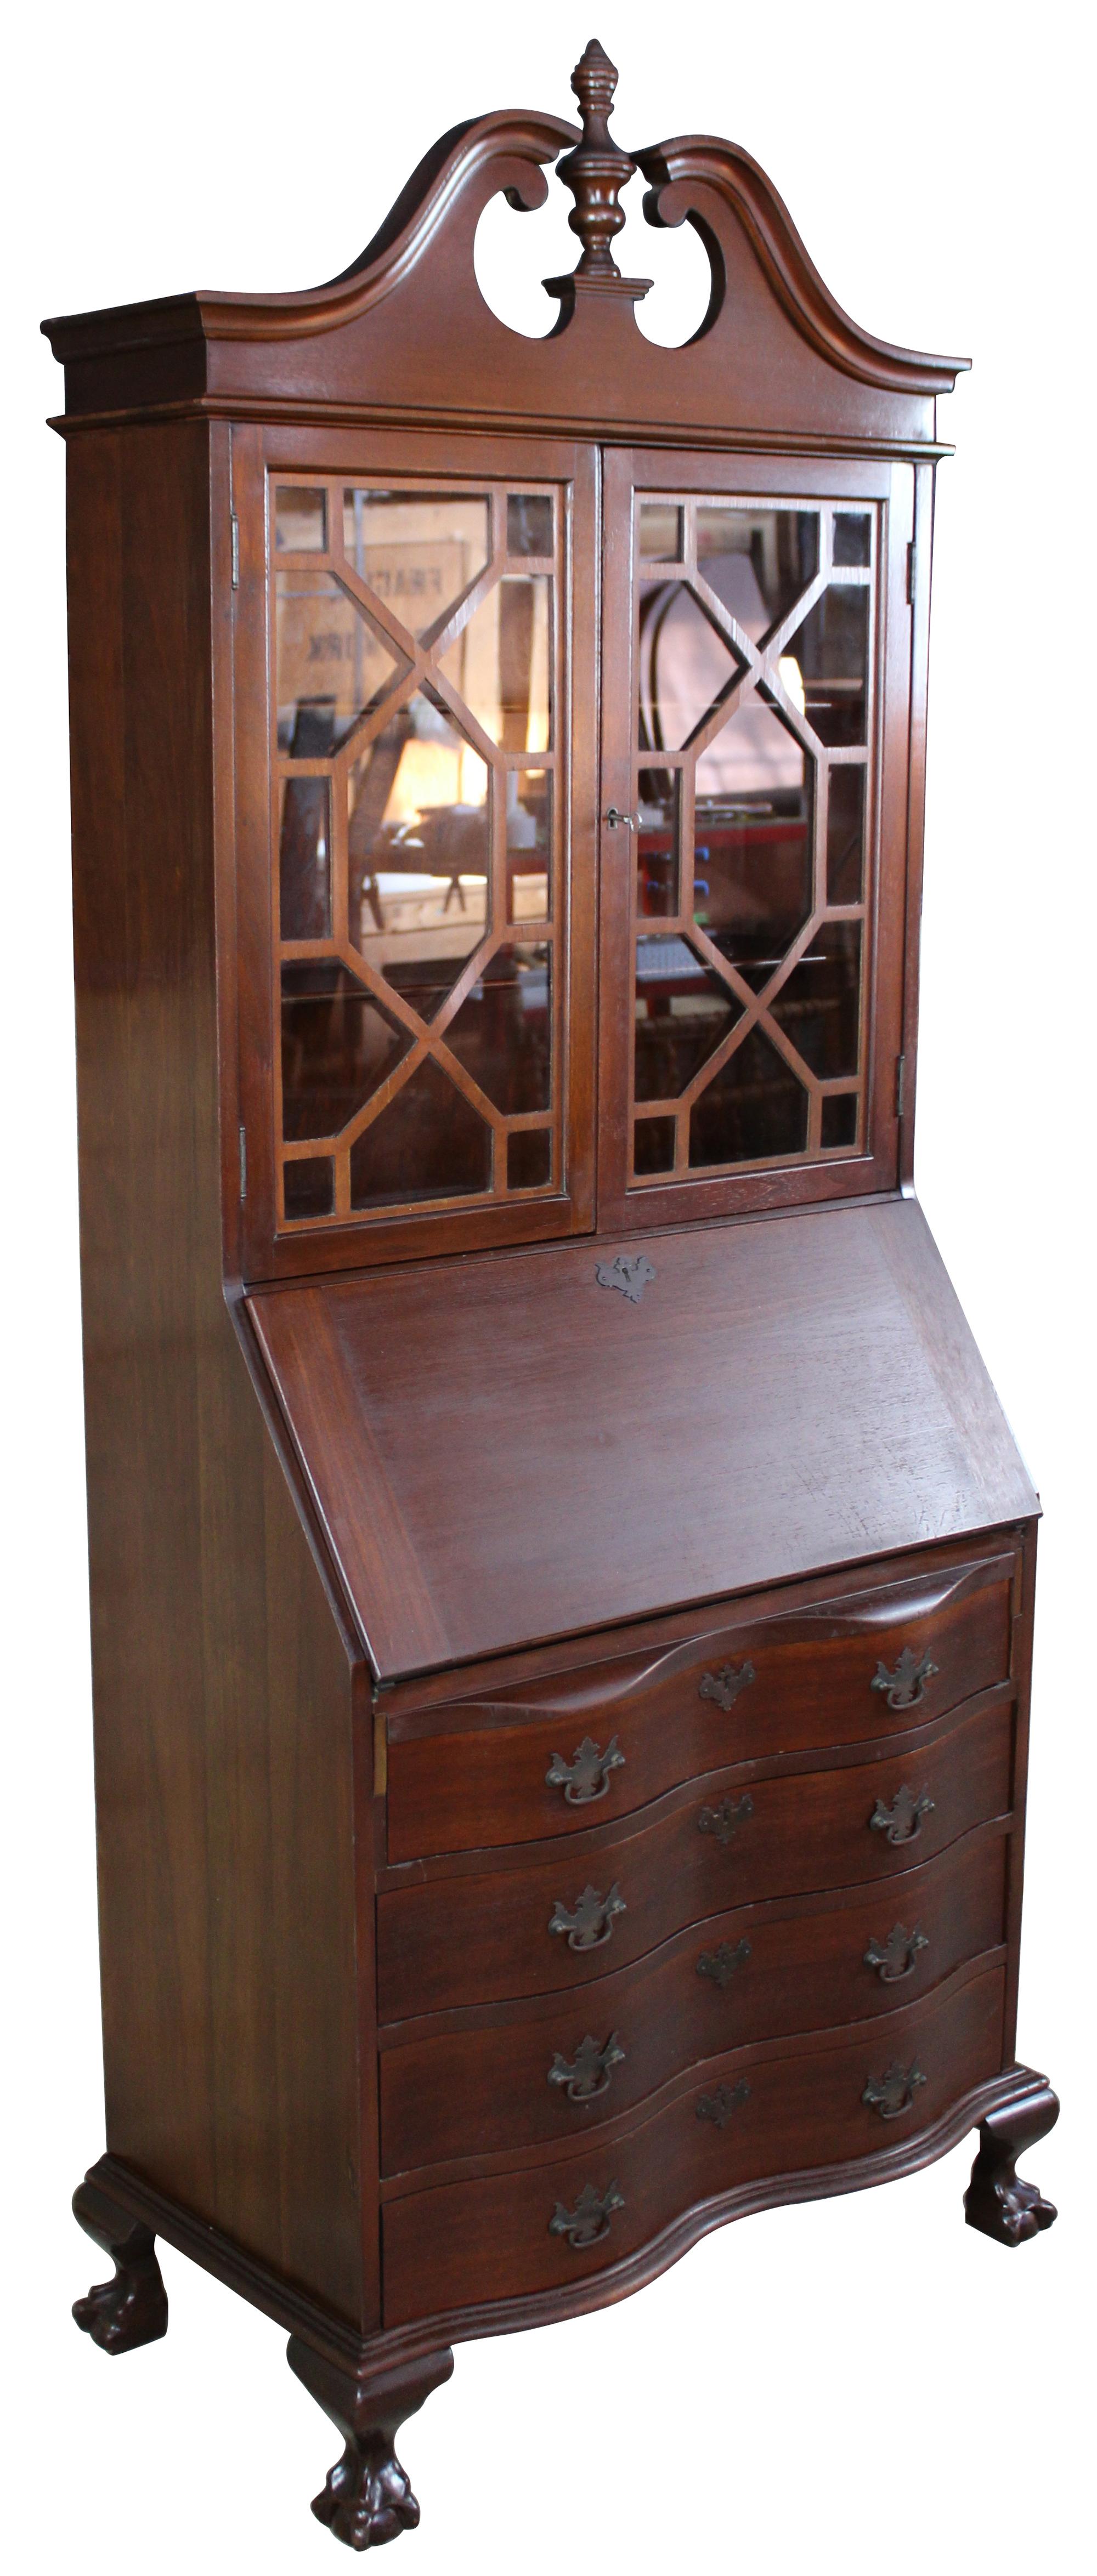 A gorgeous serpentine front one piece secretary desk. Made from American walnut. Interior opens to four drawers, pigeon holes and hidden compartments. Upper bookcase portion shows an open pediment with turned finial. Doors are glass with fretwork.